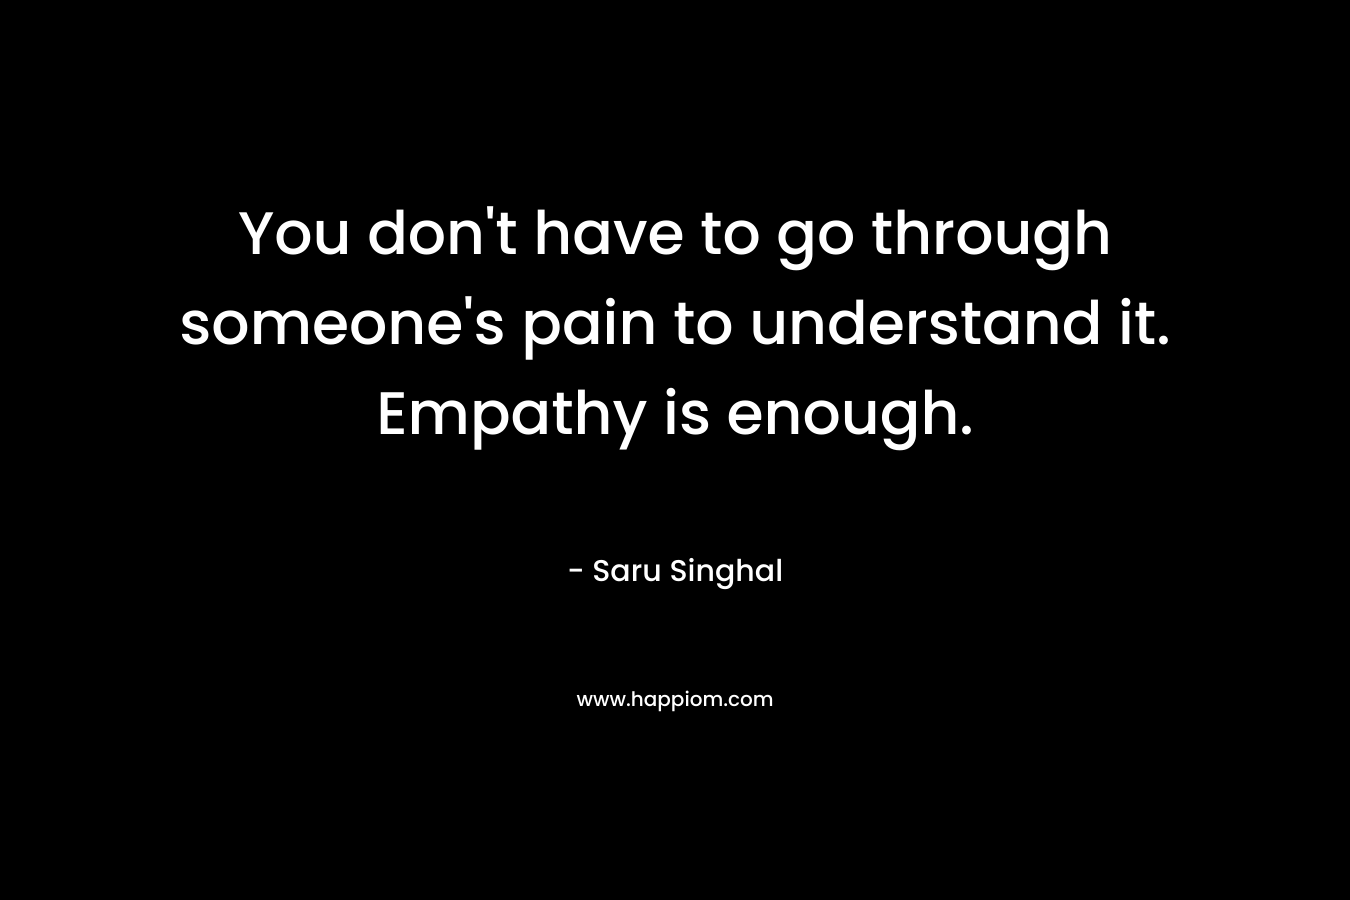 You don’t have to go through someone’s pain to understand it. Empathy is enough. – Saru Singhal